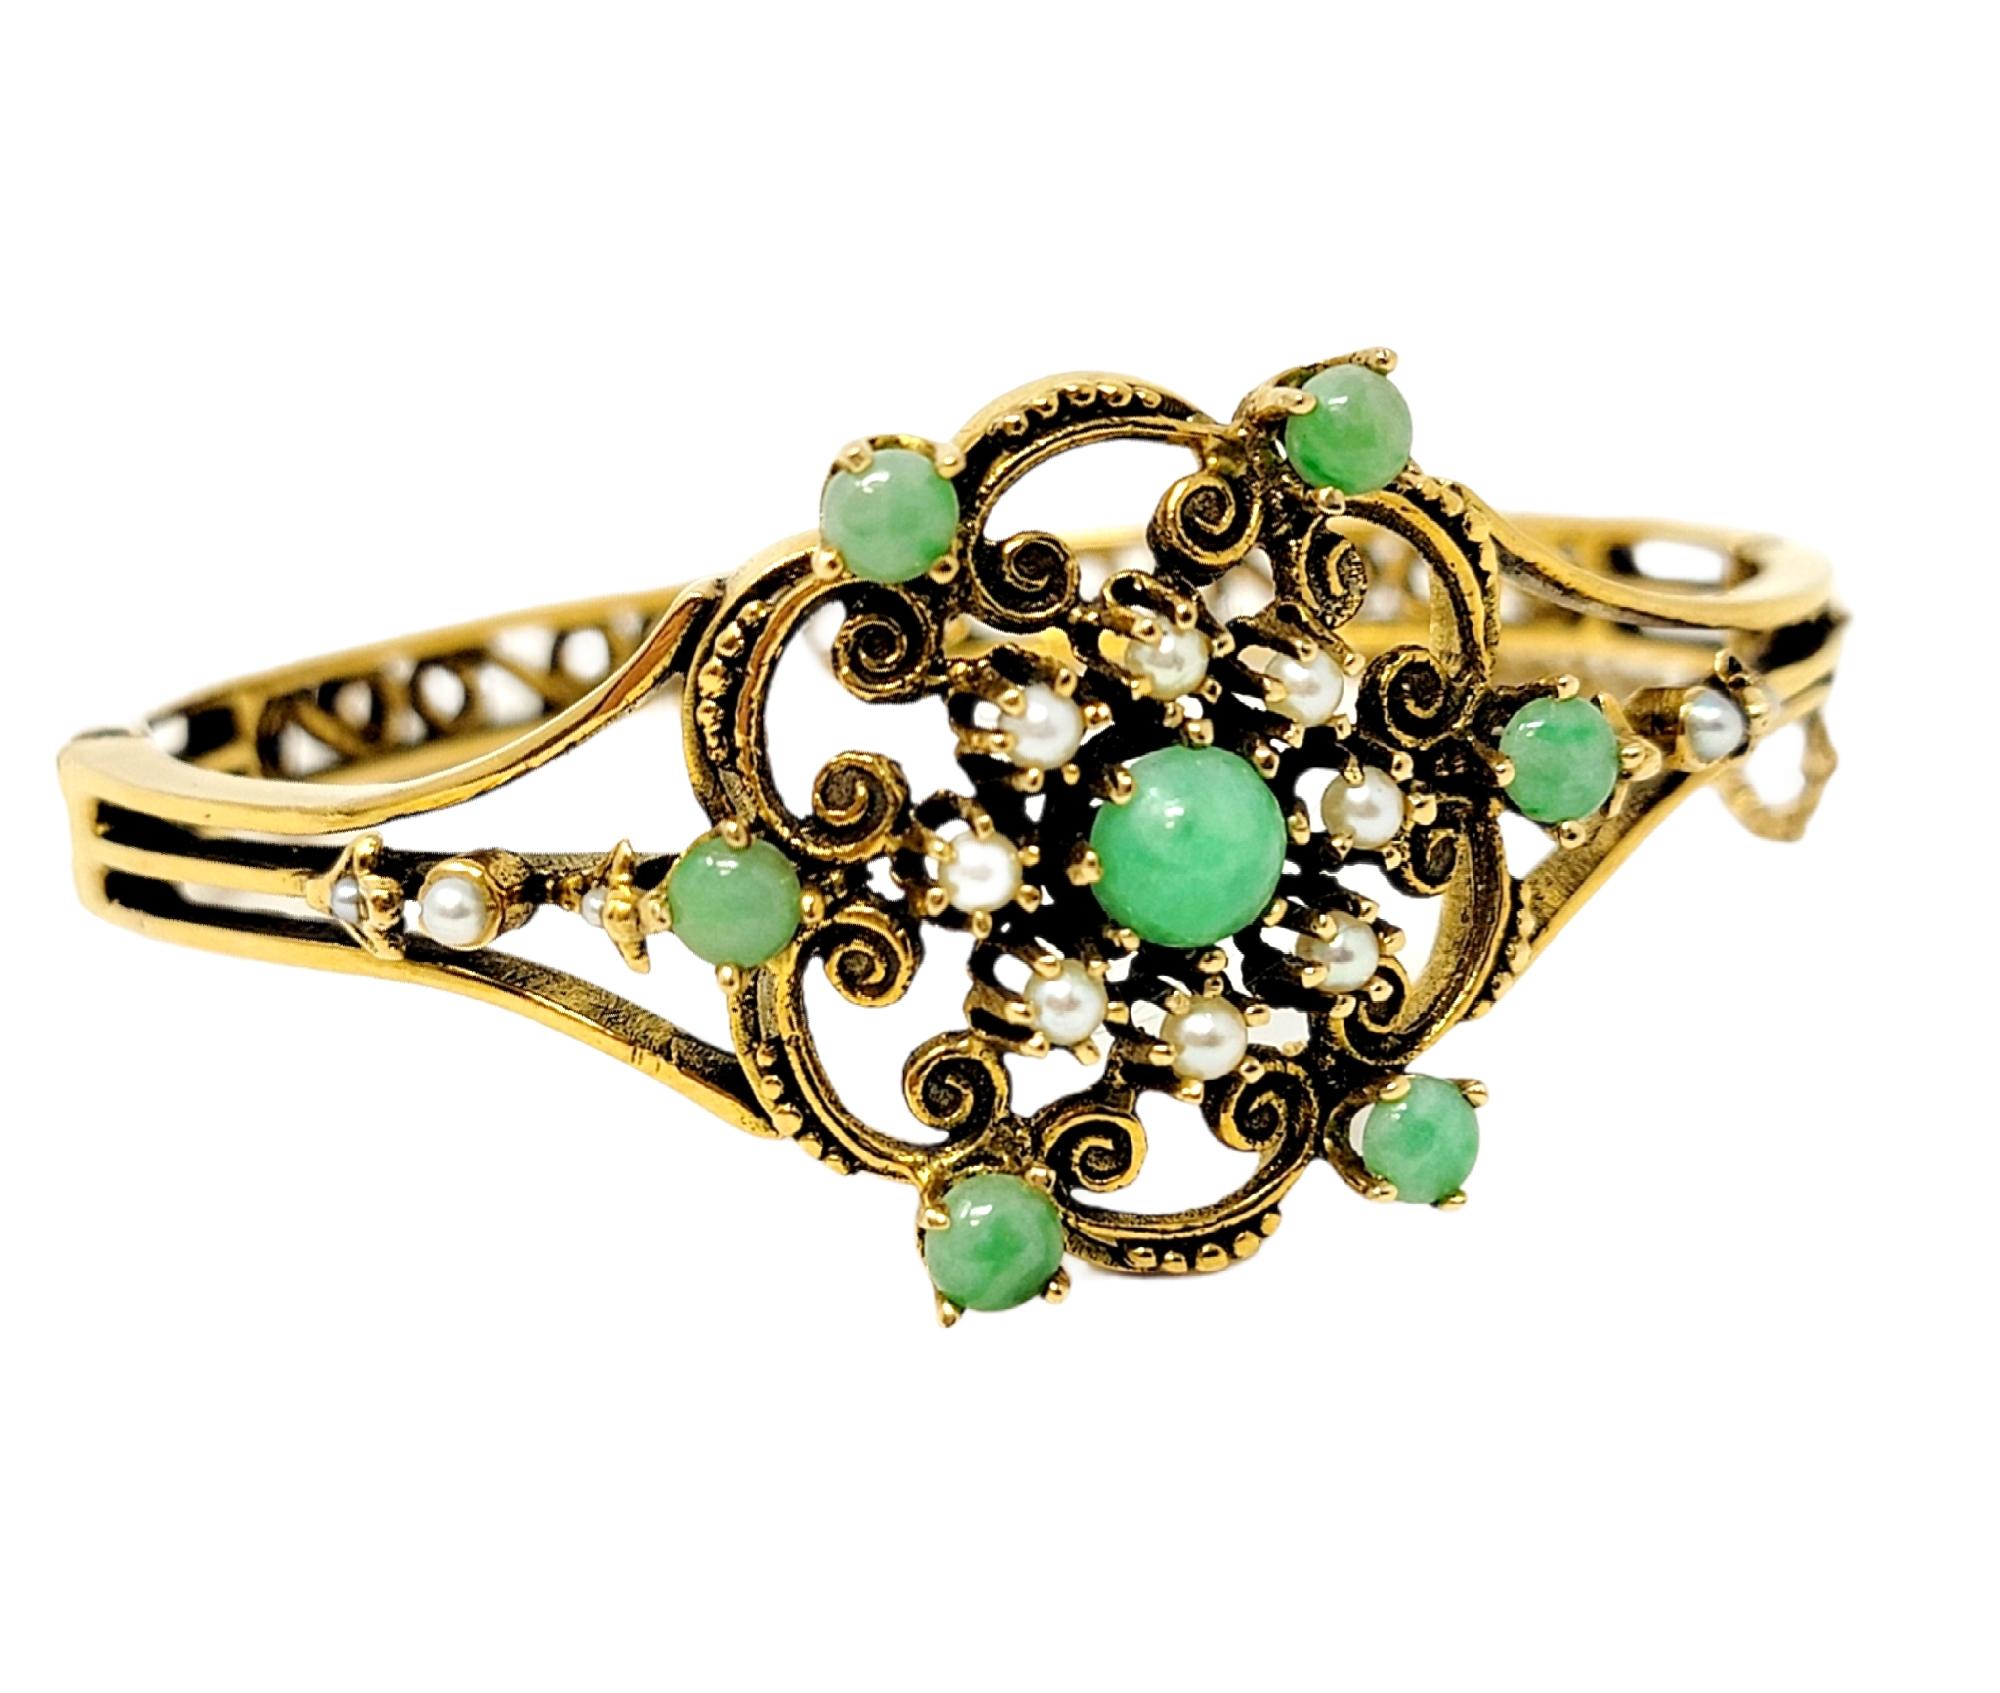 Gorgeous vintage bracelet with stunning ornate details. Delicate in design yet bold in beauty, this vintage bangle will truly light up your wrist. This lovely bracelet features a single .87 carat round cabochon jadeite stone prong set at the center